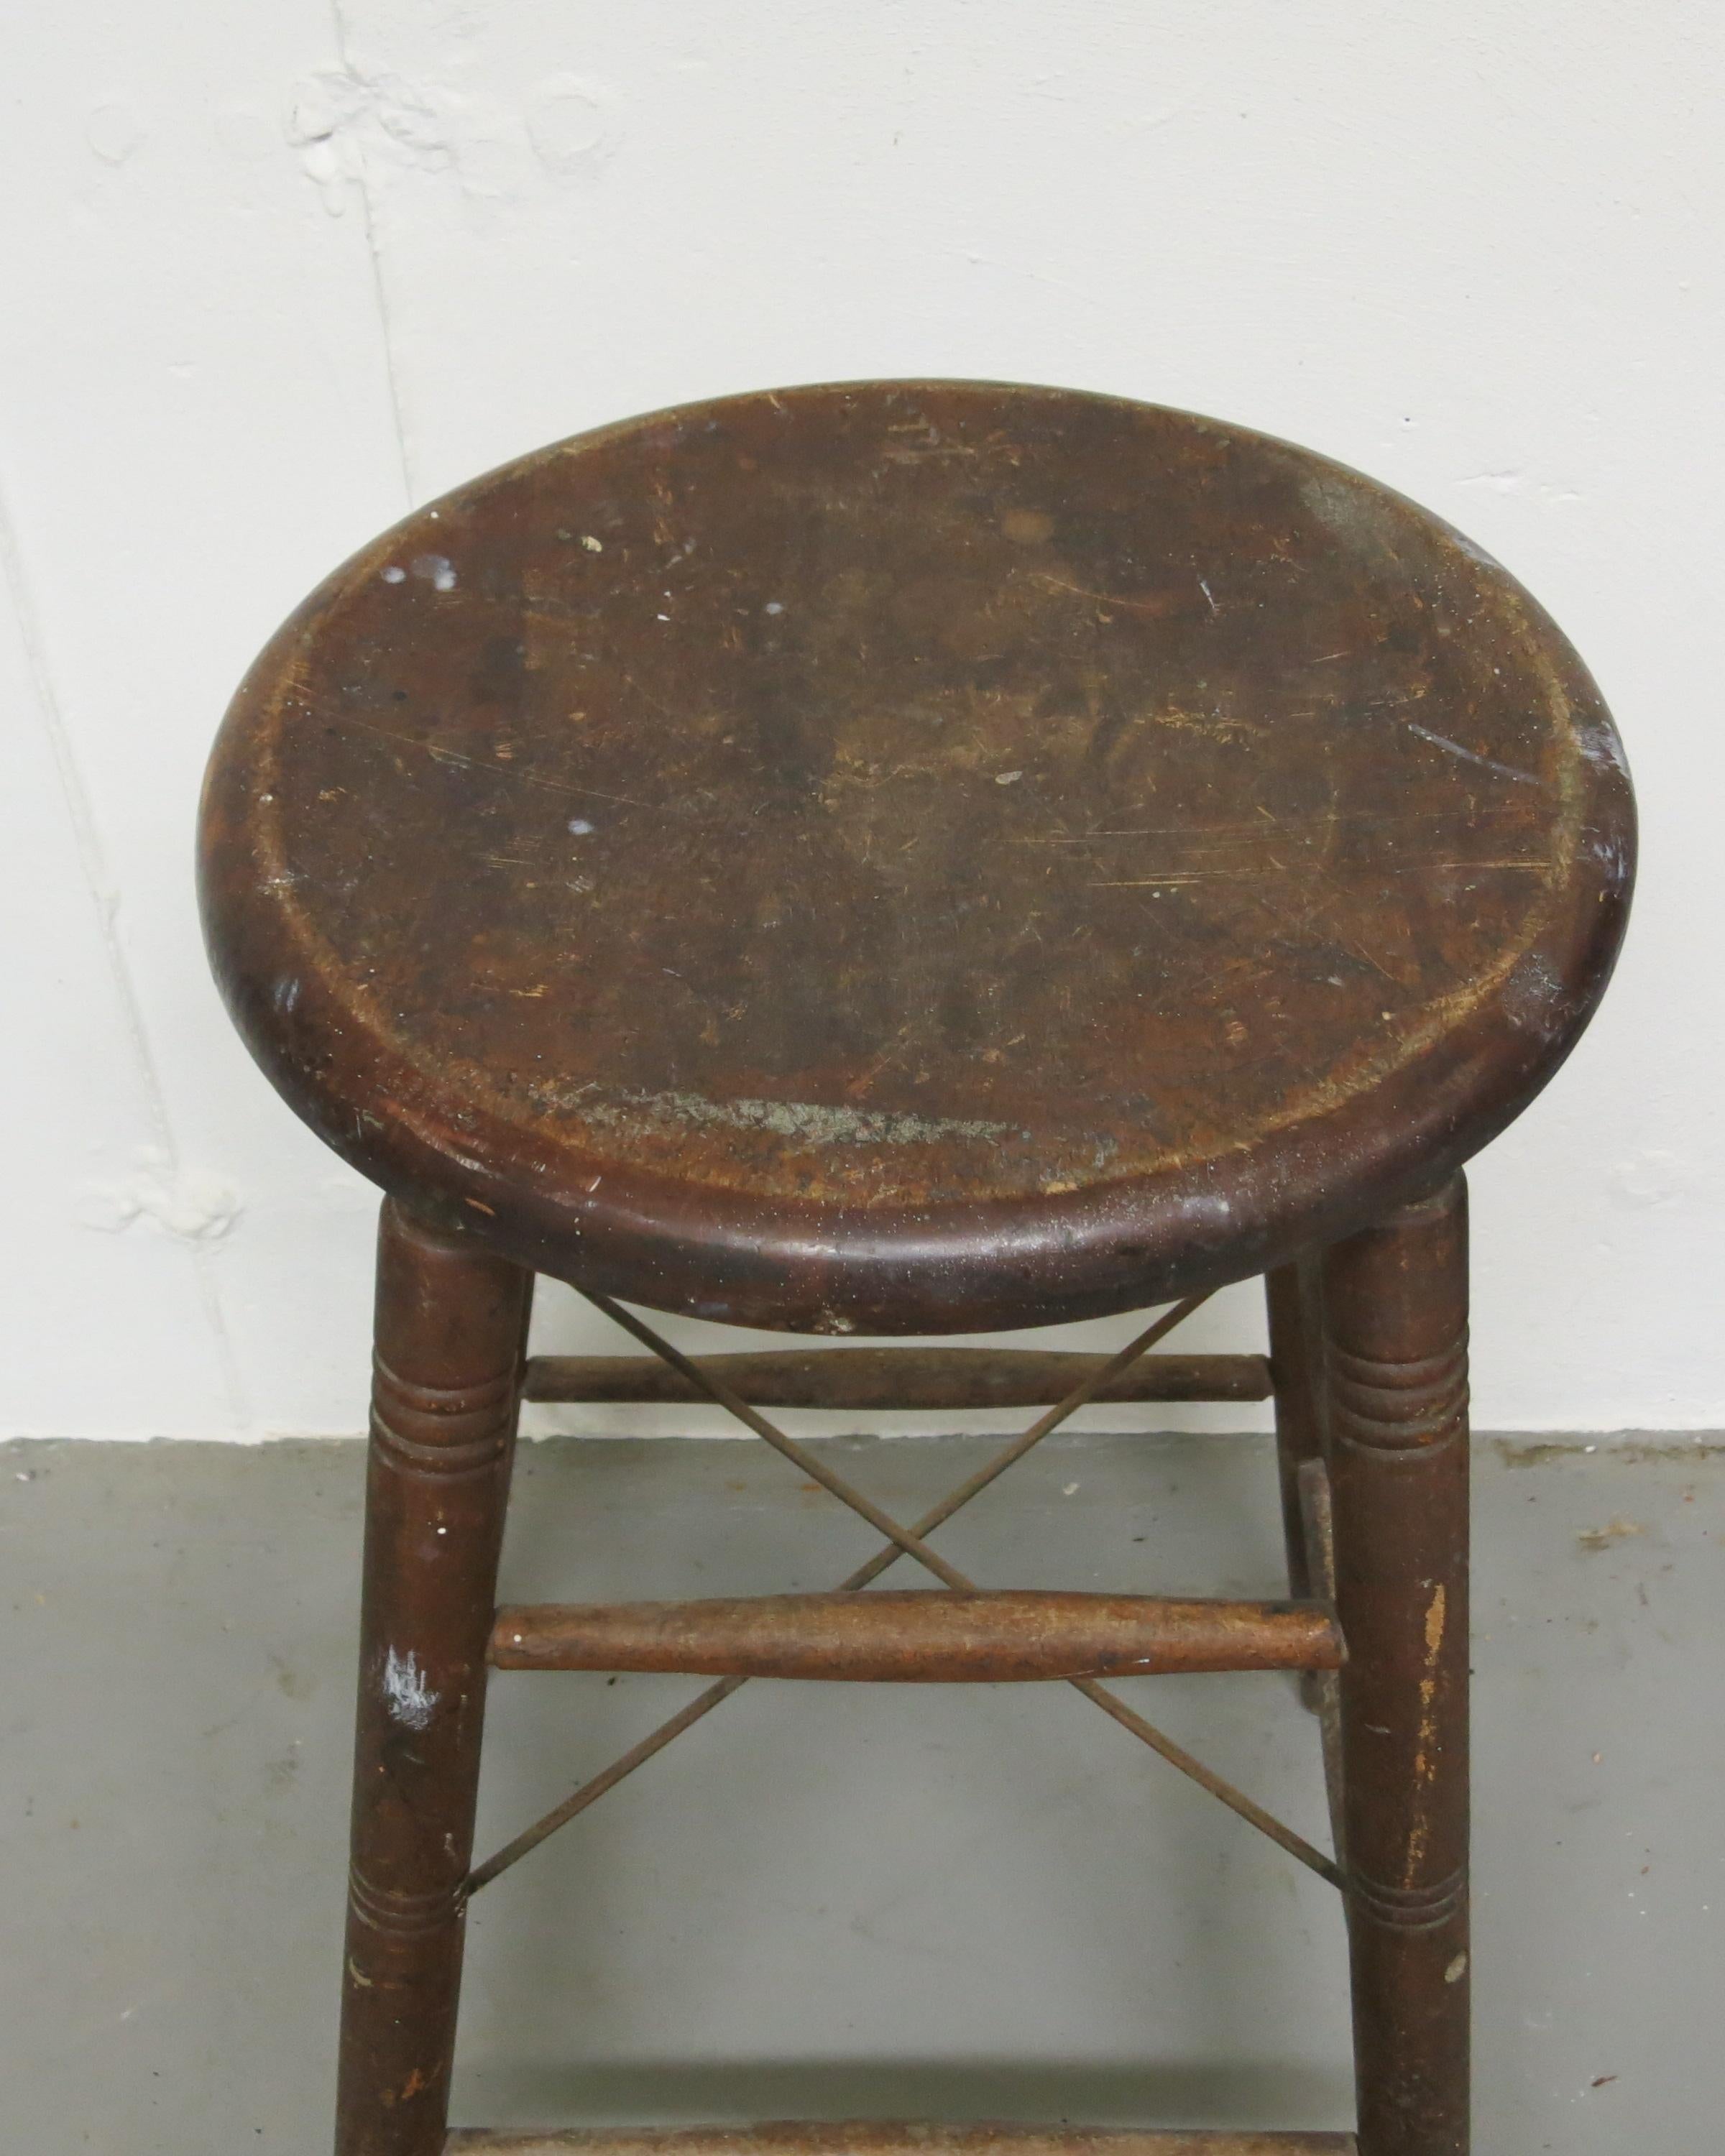 S. Bent and Brothers rustic wooden stool turn of the century. It is 27